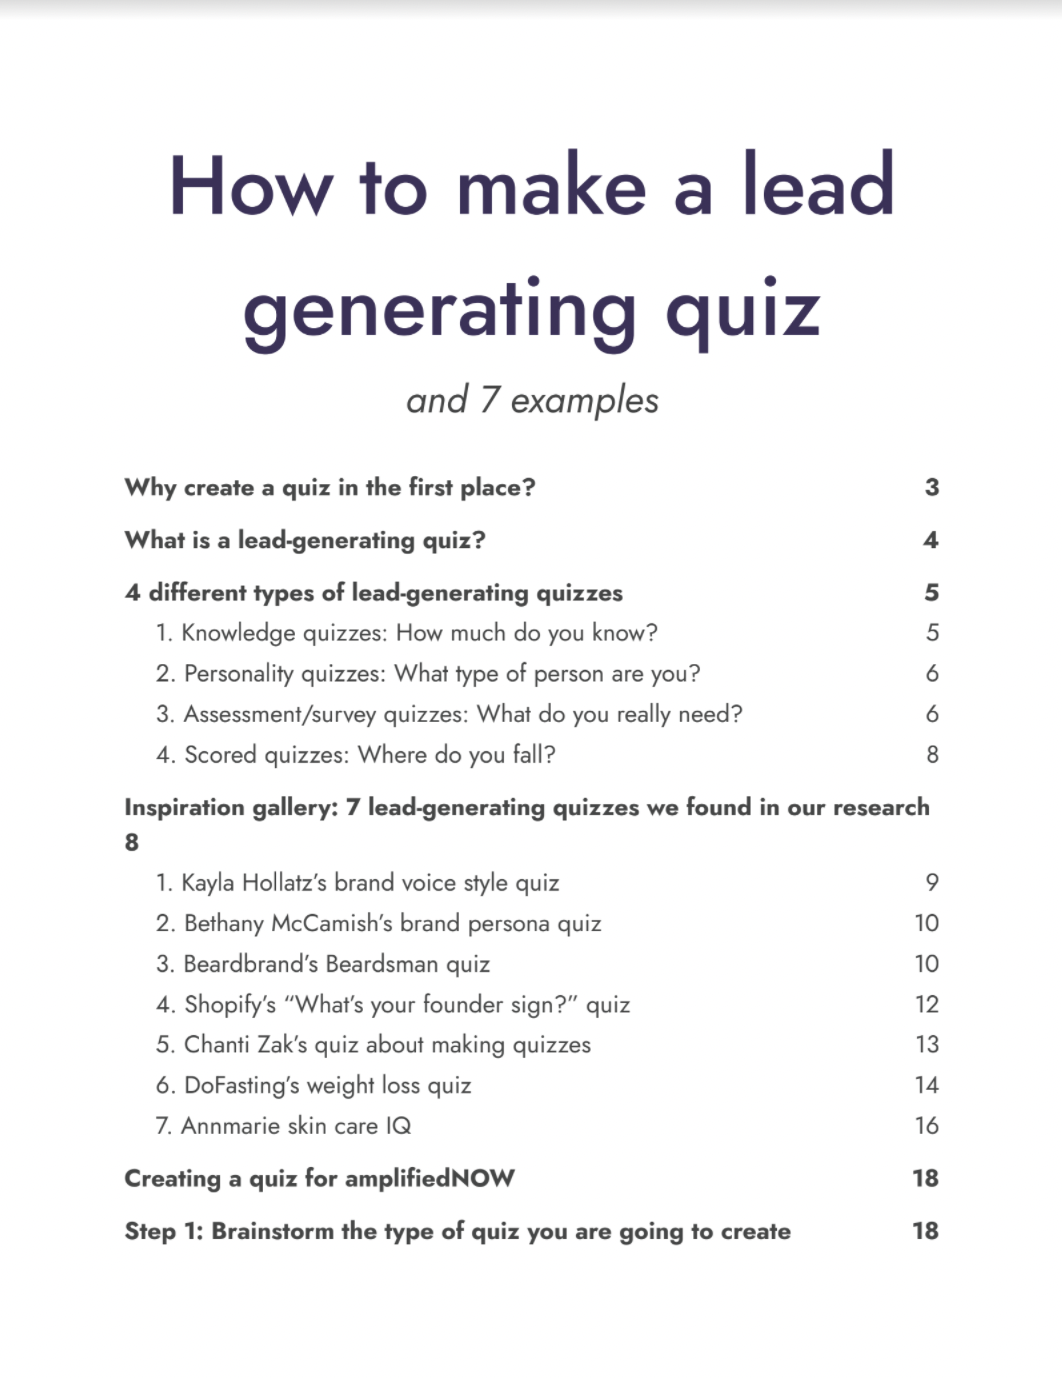 How to make a lead generating quiz